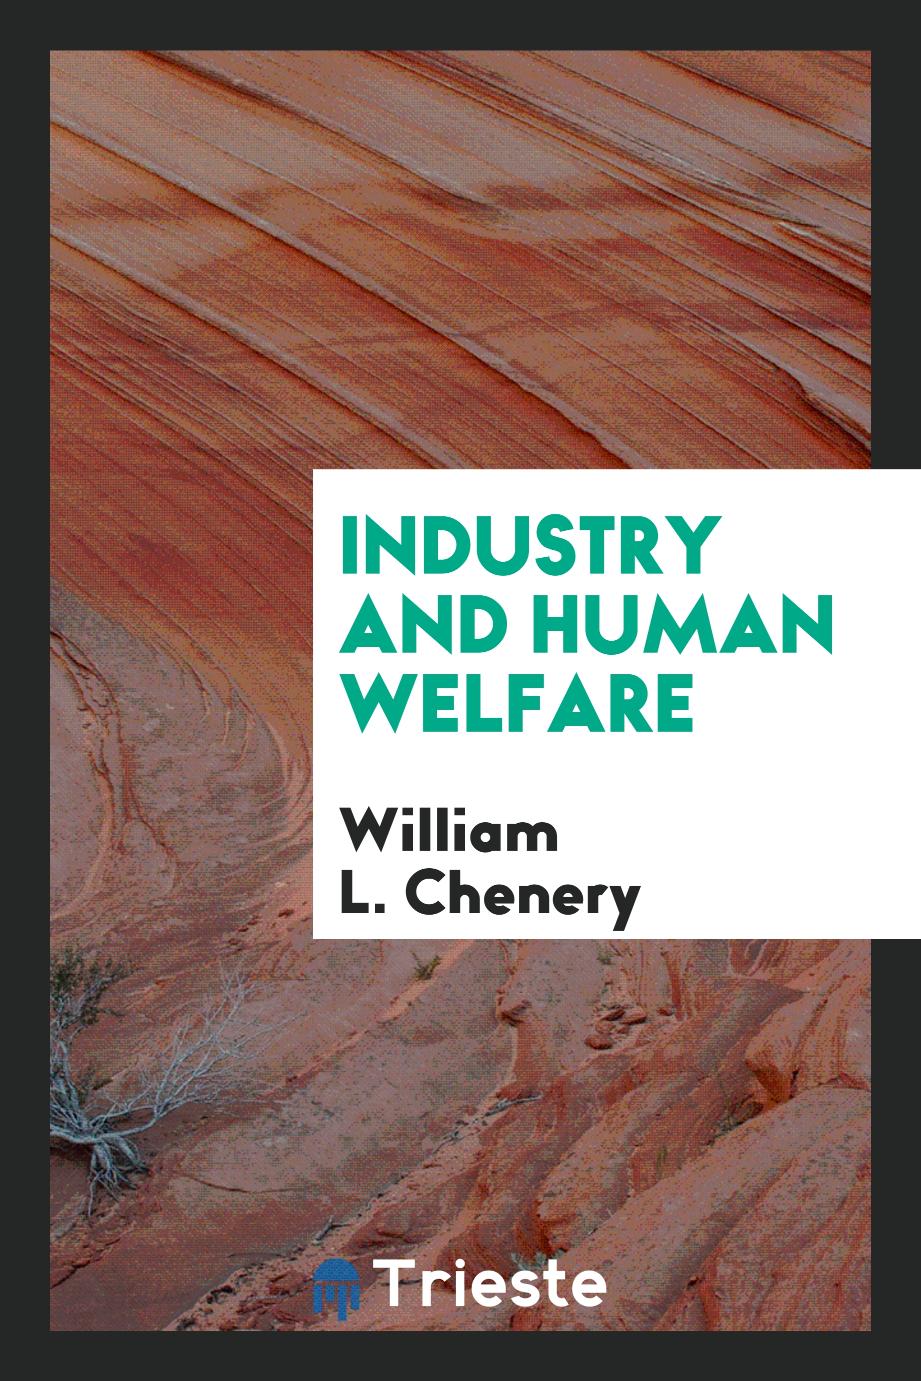 William L. Chenery - Industry and human welfare